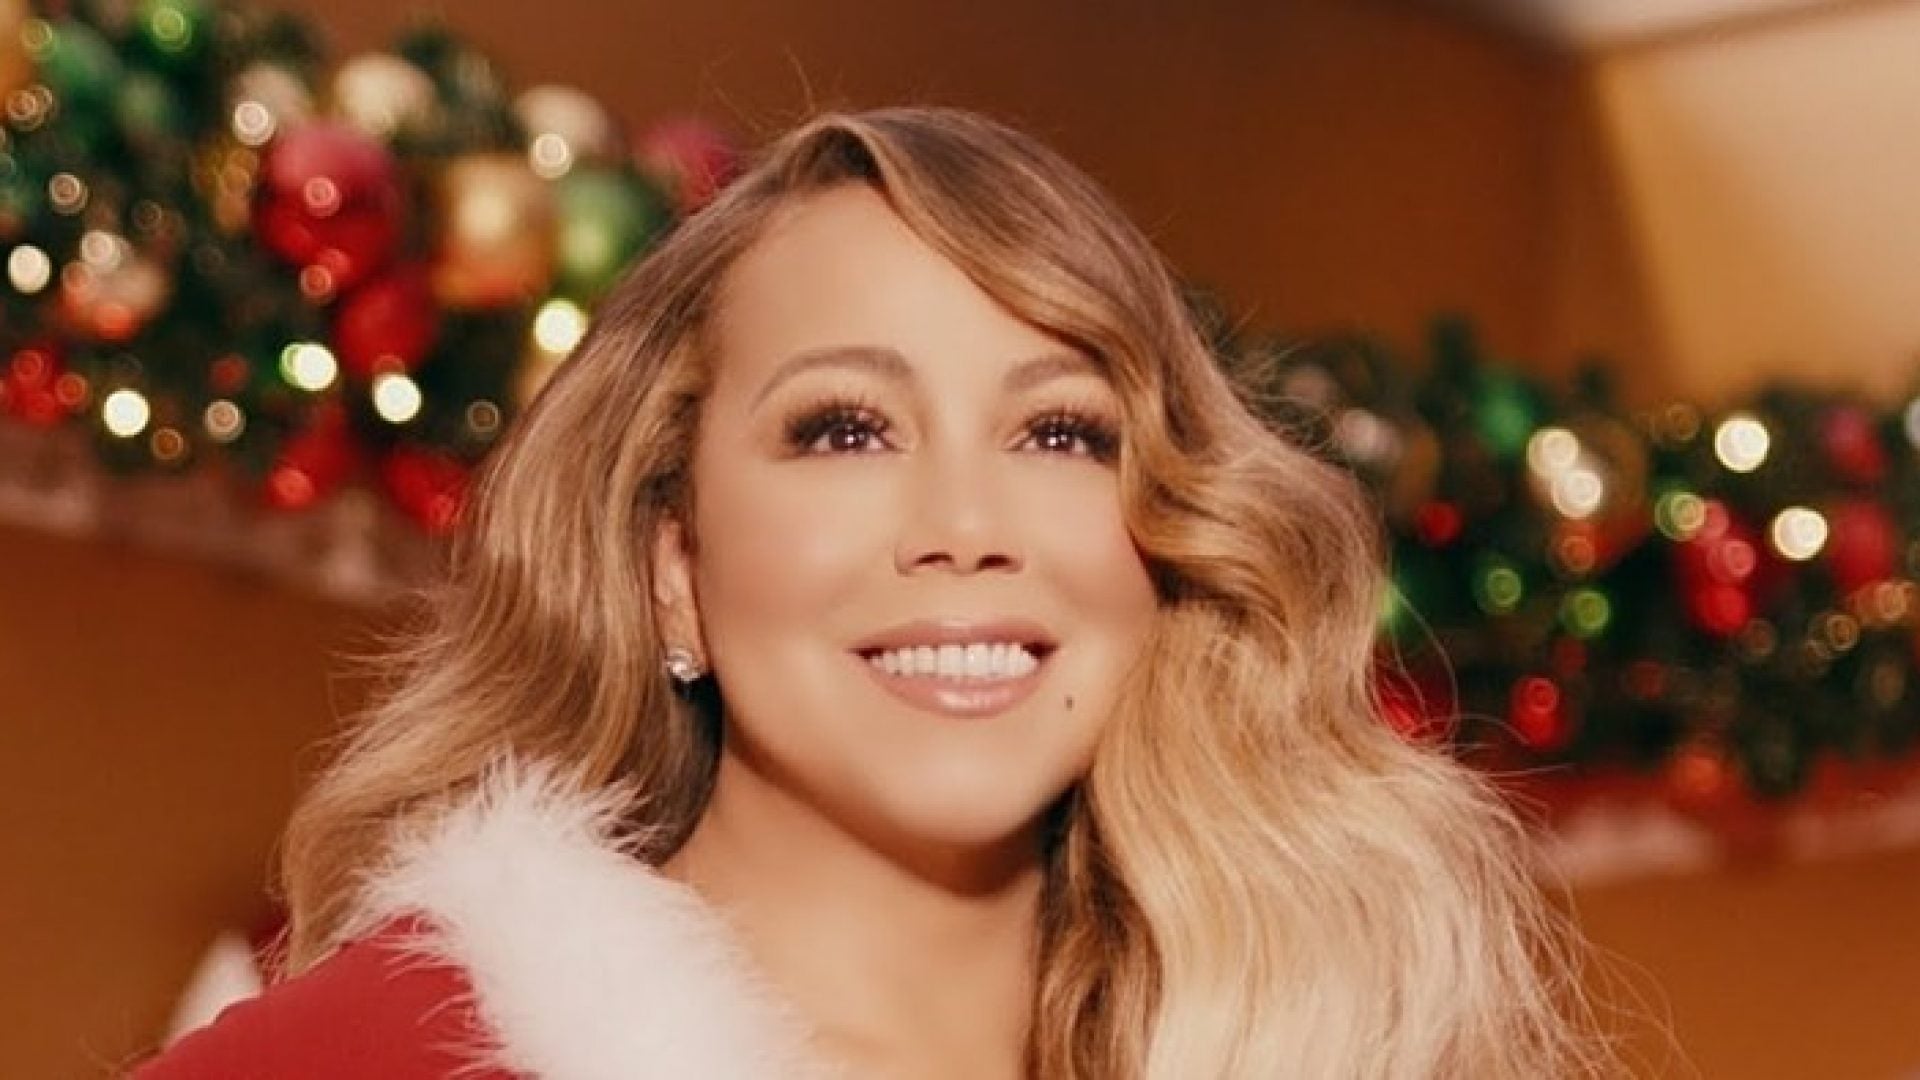 Mariah Carey's New Video For 'All I Want For Christmas Is You' Is Magical! - Essence